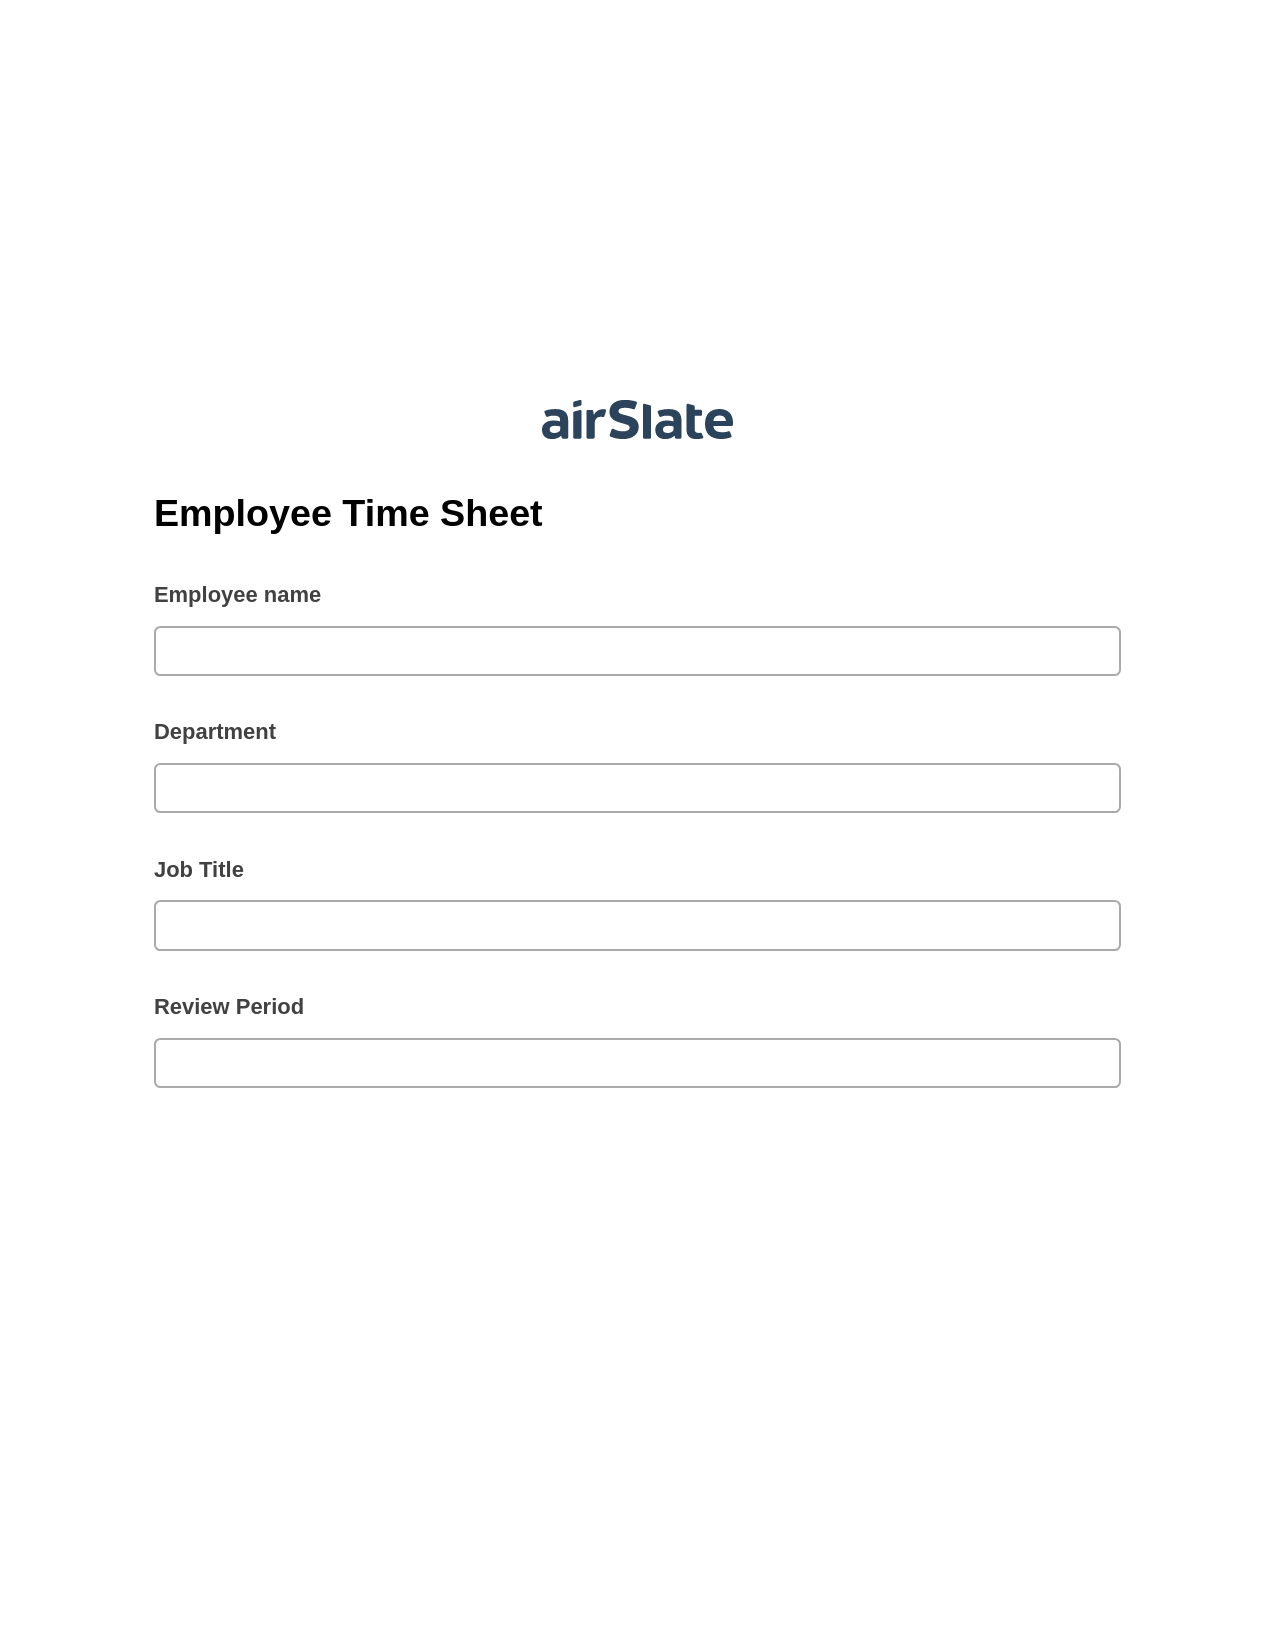 Multirole Employee Time Sheet Pre-fill from Salesforce Records with SOQL Bot, Create slate addon, Export to Excel 365 Bot